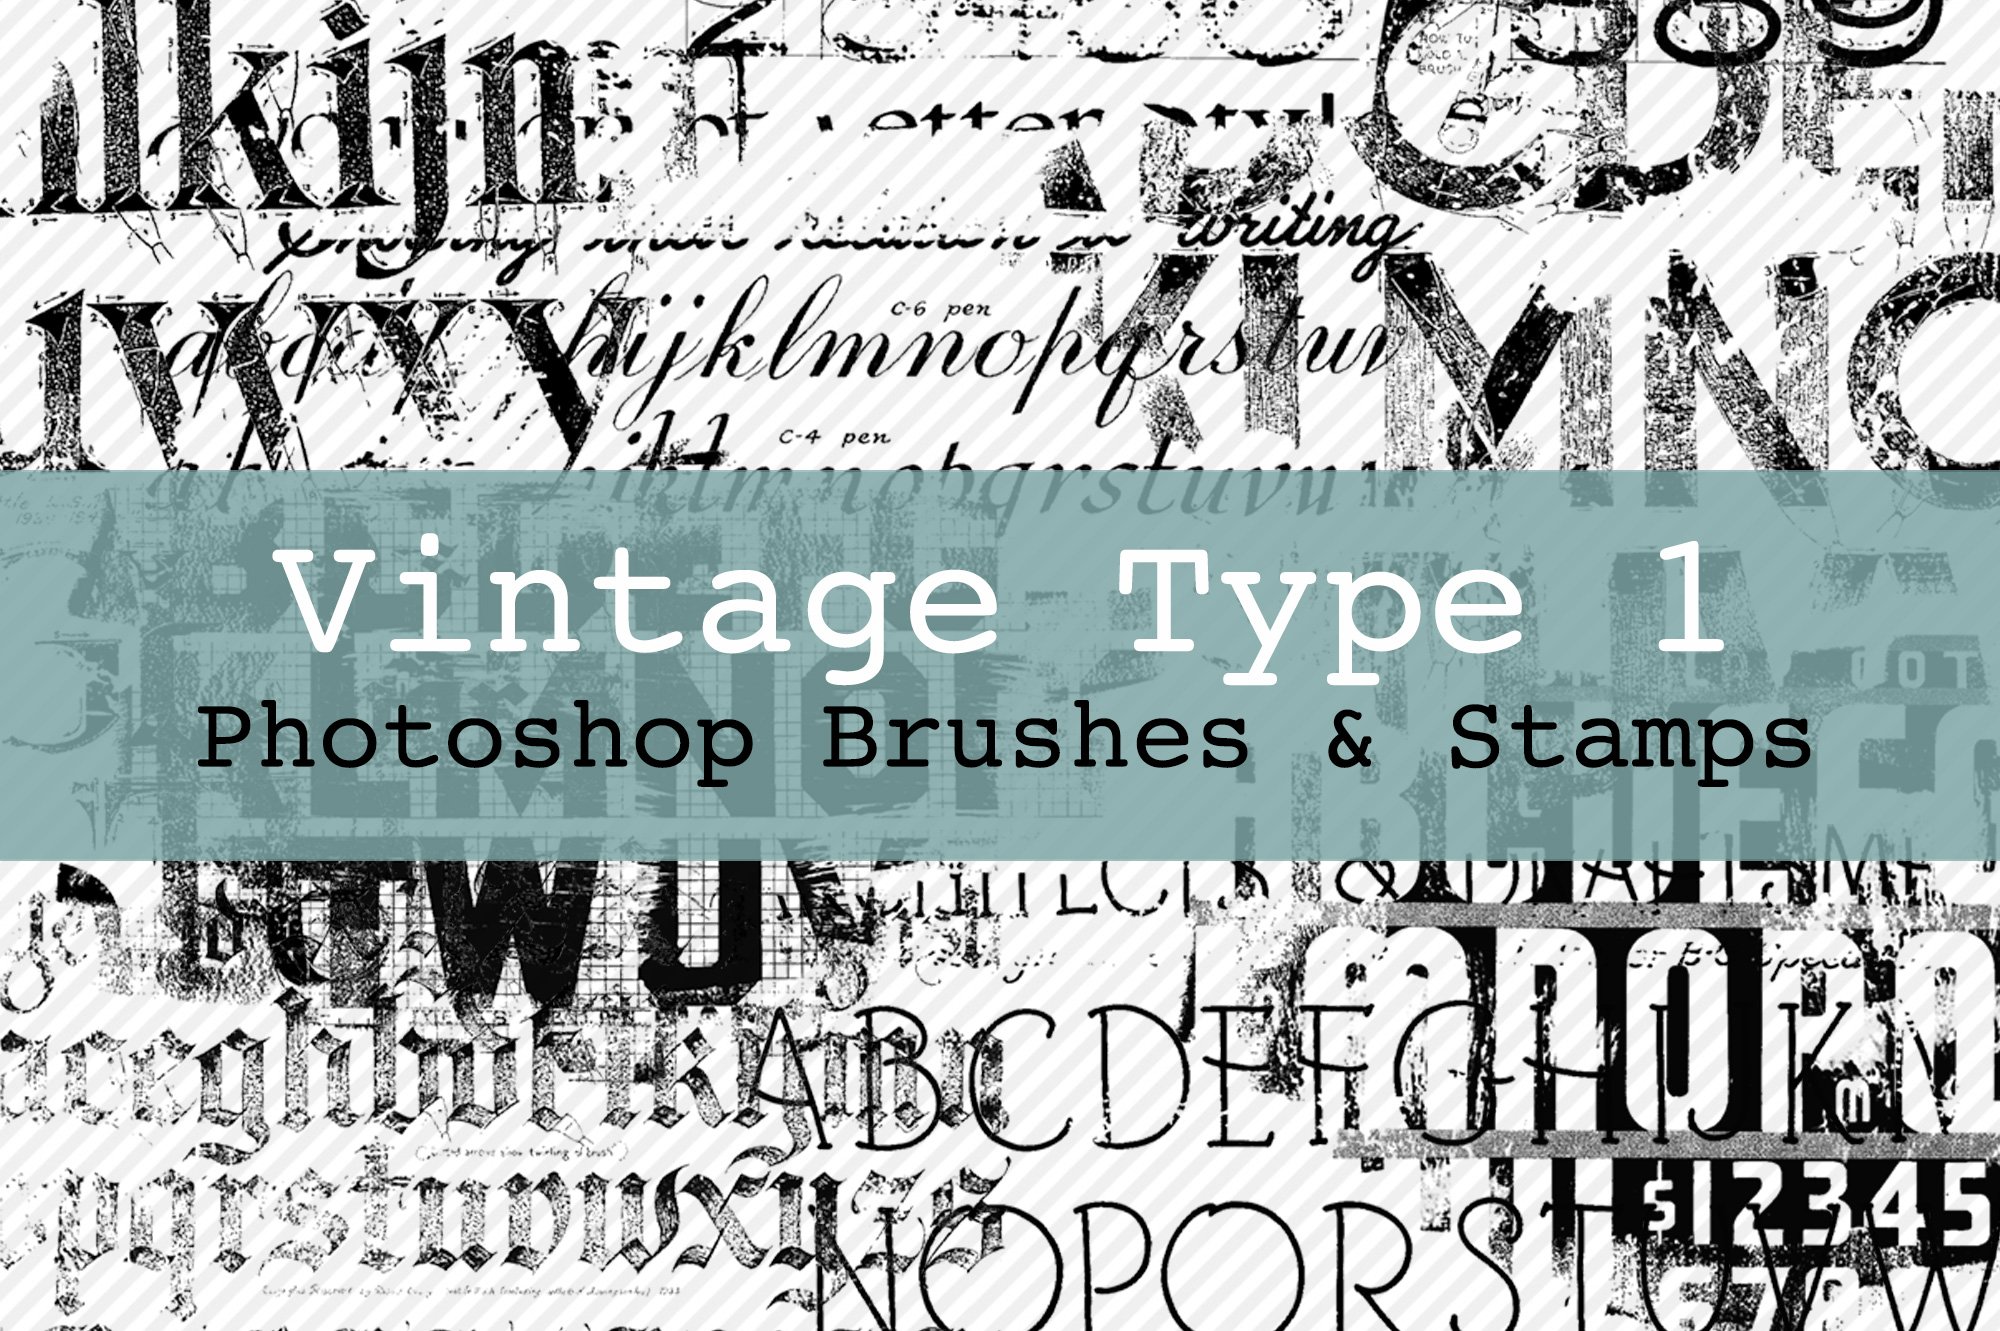 Vintage Type Brushes & Stamps 1cover image.